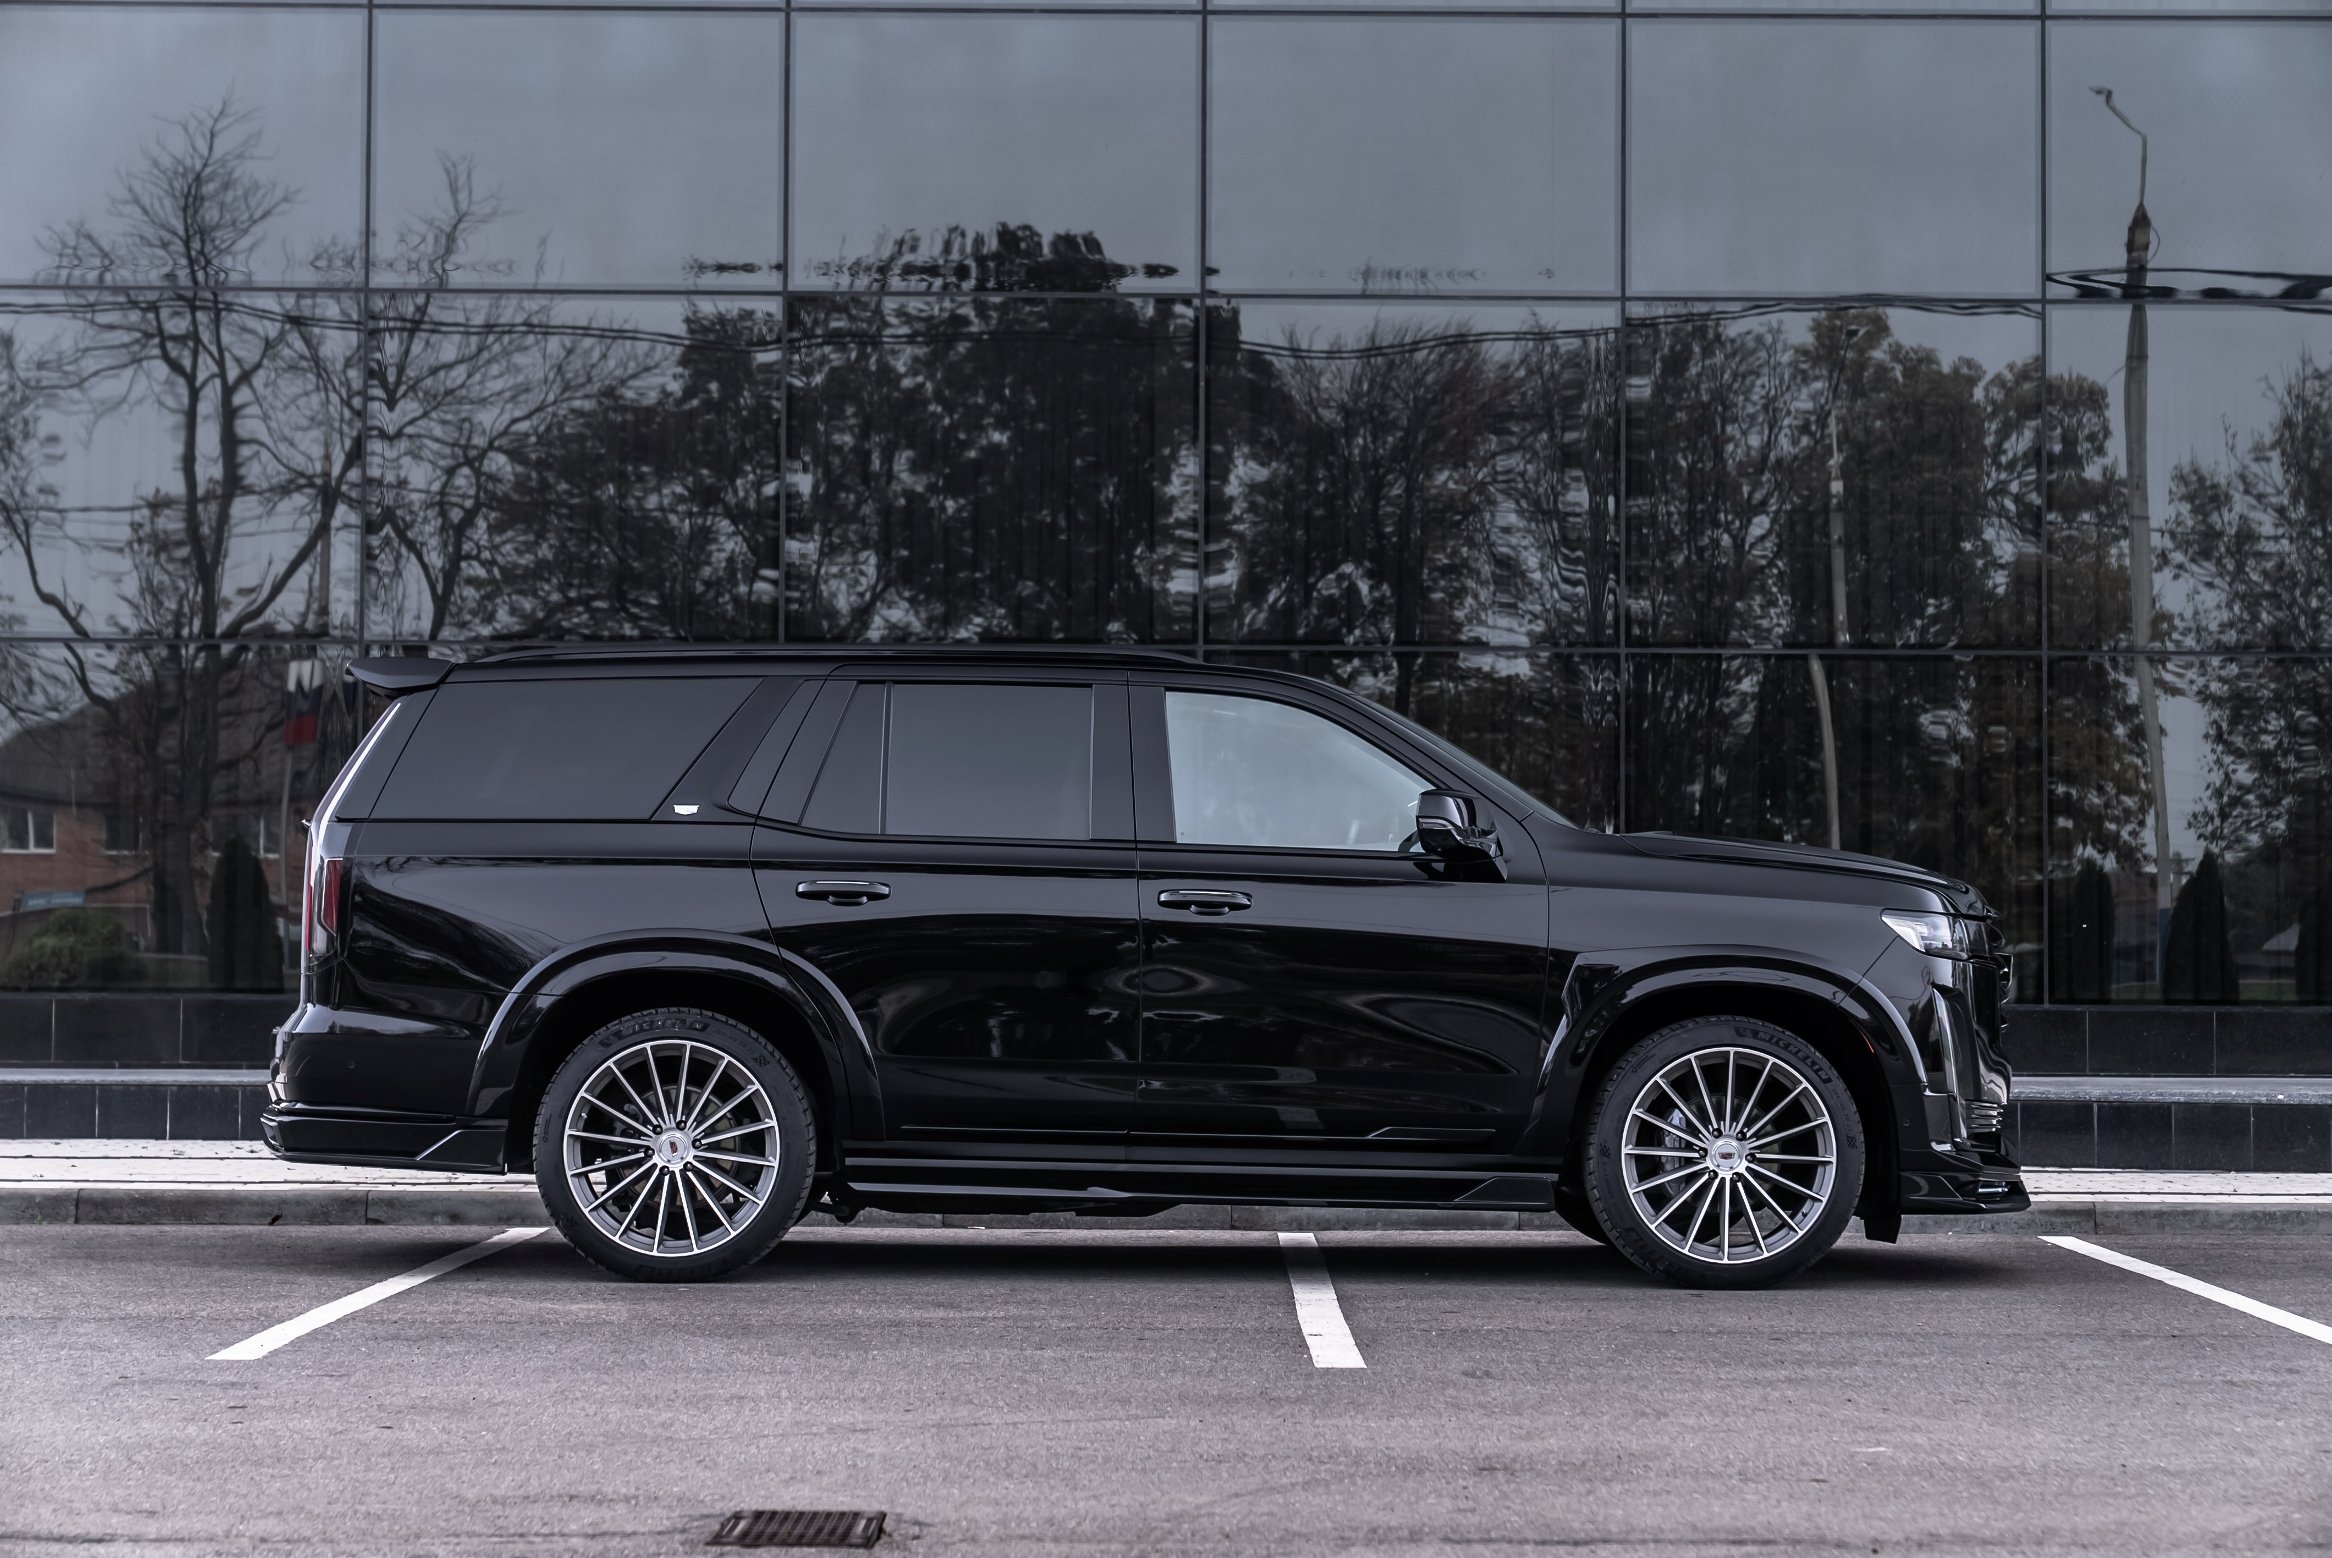 Check our price and buy SCL Performance body kit for Cadillac Escalade Miriada!